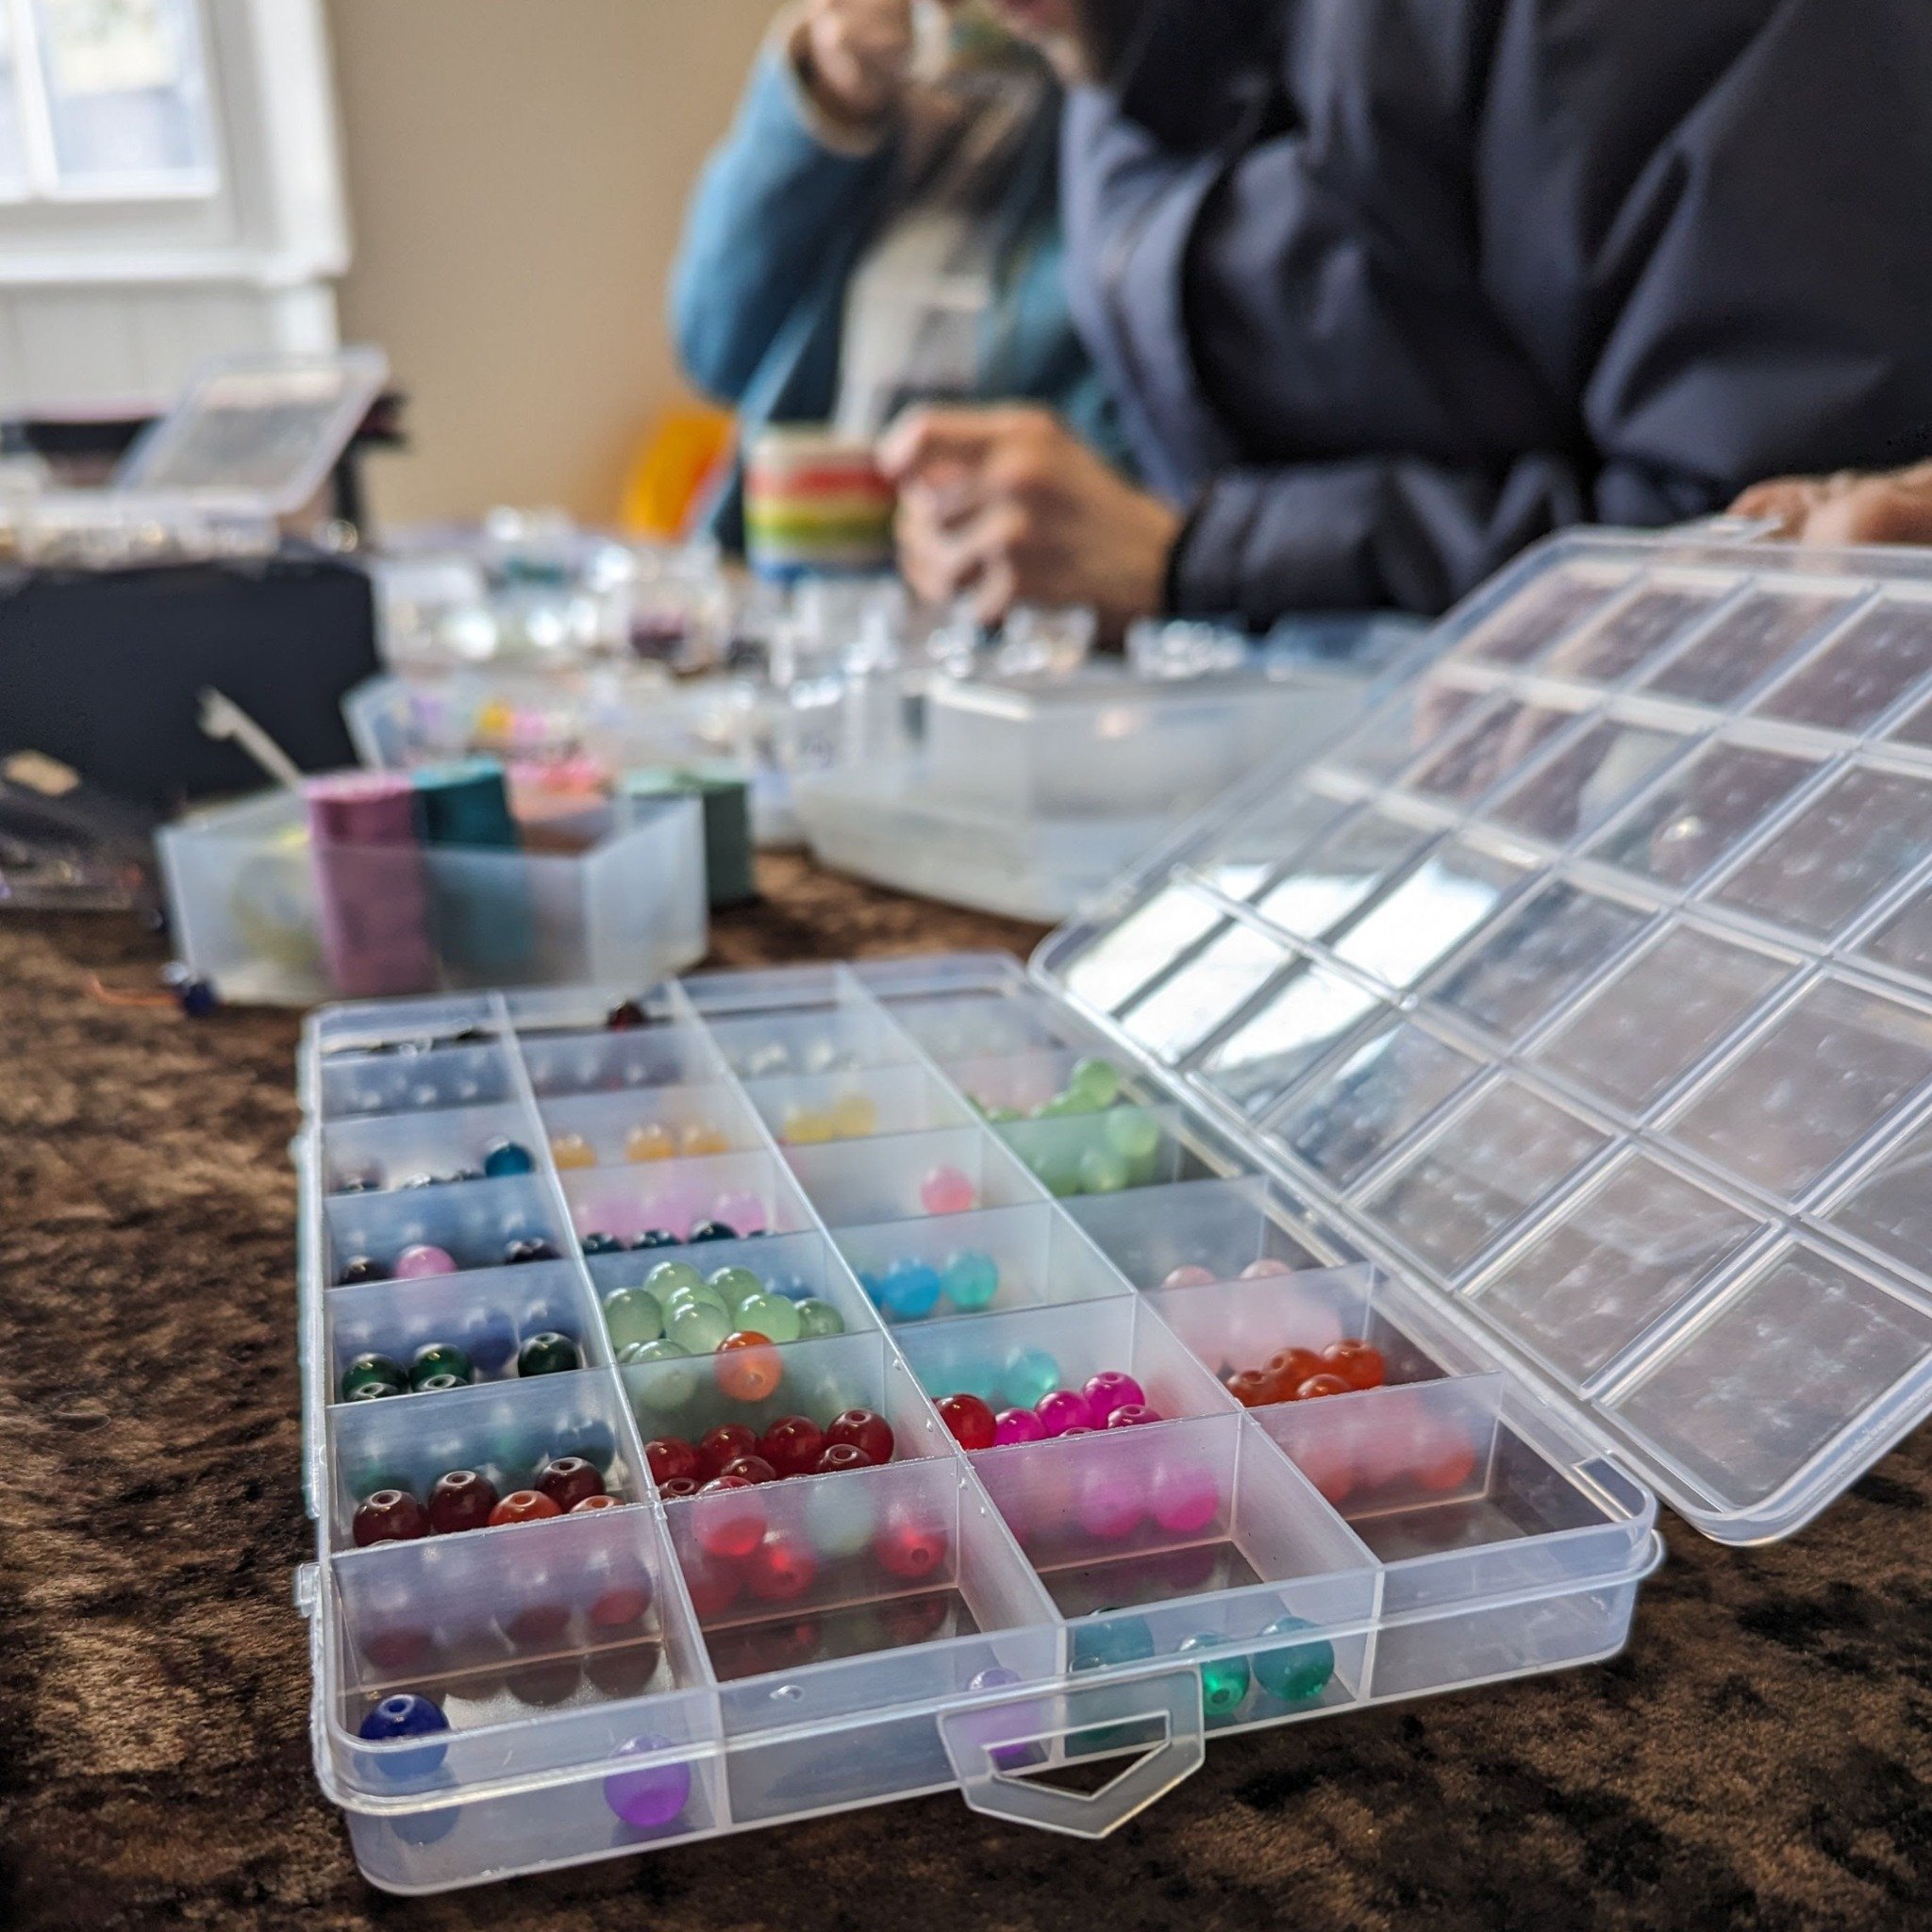 What's On @ Creative Community Cafe, Romford Market

On Tuesday, we welcomed June to the Creative Community Cafe for a morning of jewellery-making. Colourful beaded bracelets and earrings were the creations this week, with our regulars enjoying threa